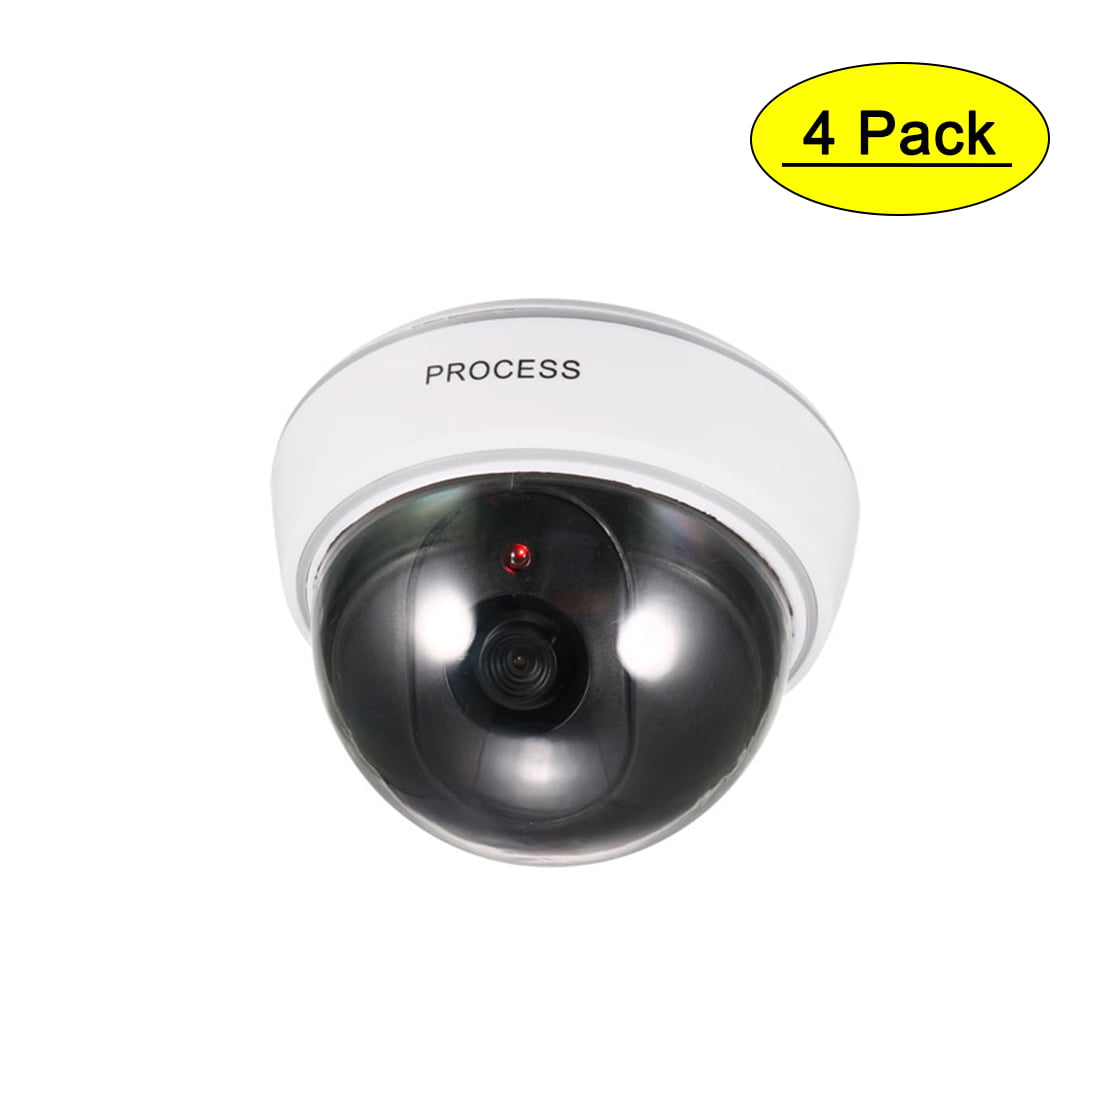 Dummy Surveillance Camera Dome Cam Flashing Red LED For Home Office Security 